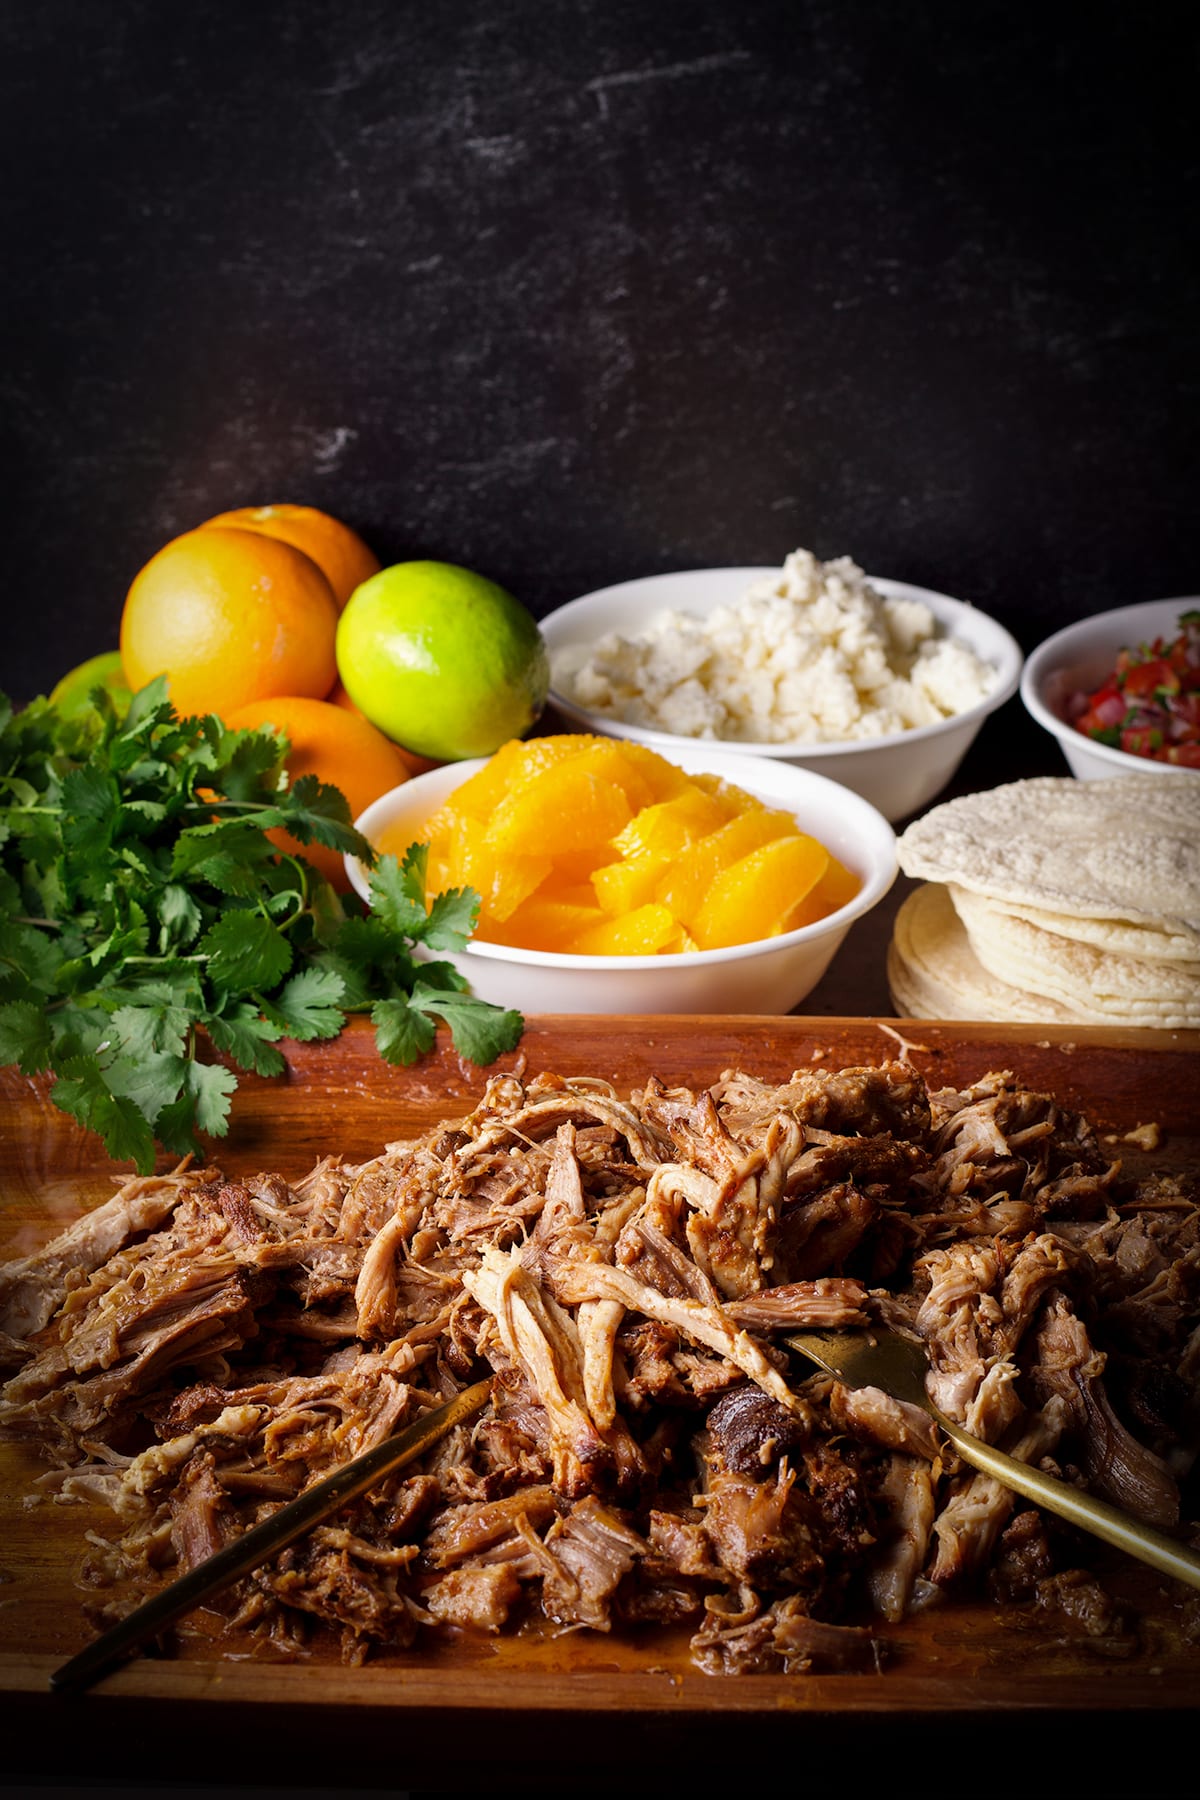 A wood tray filled with shredded pork for tacos.